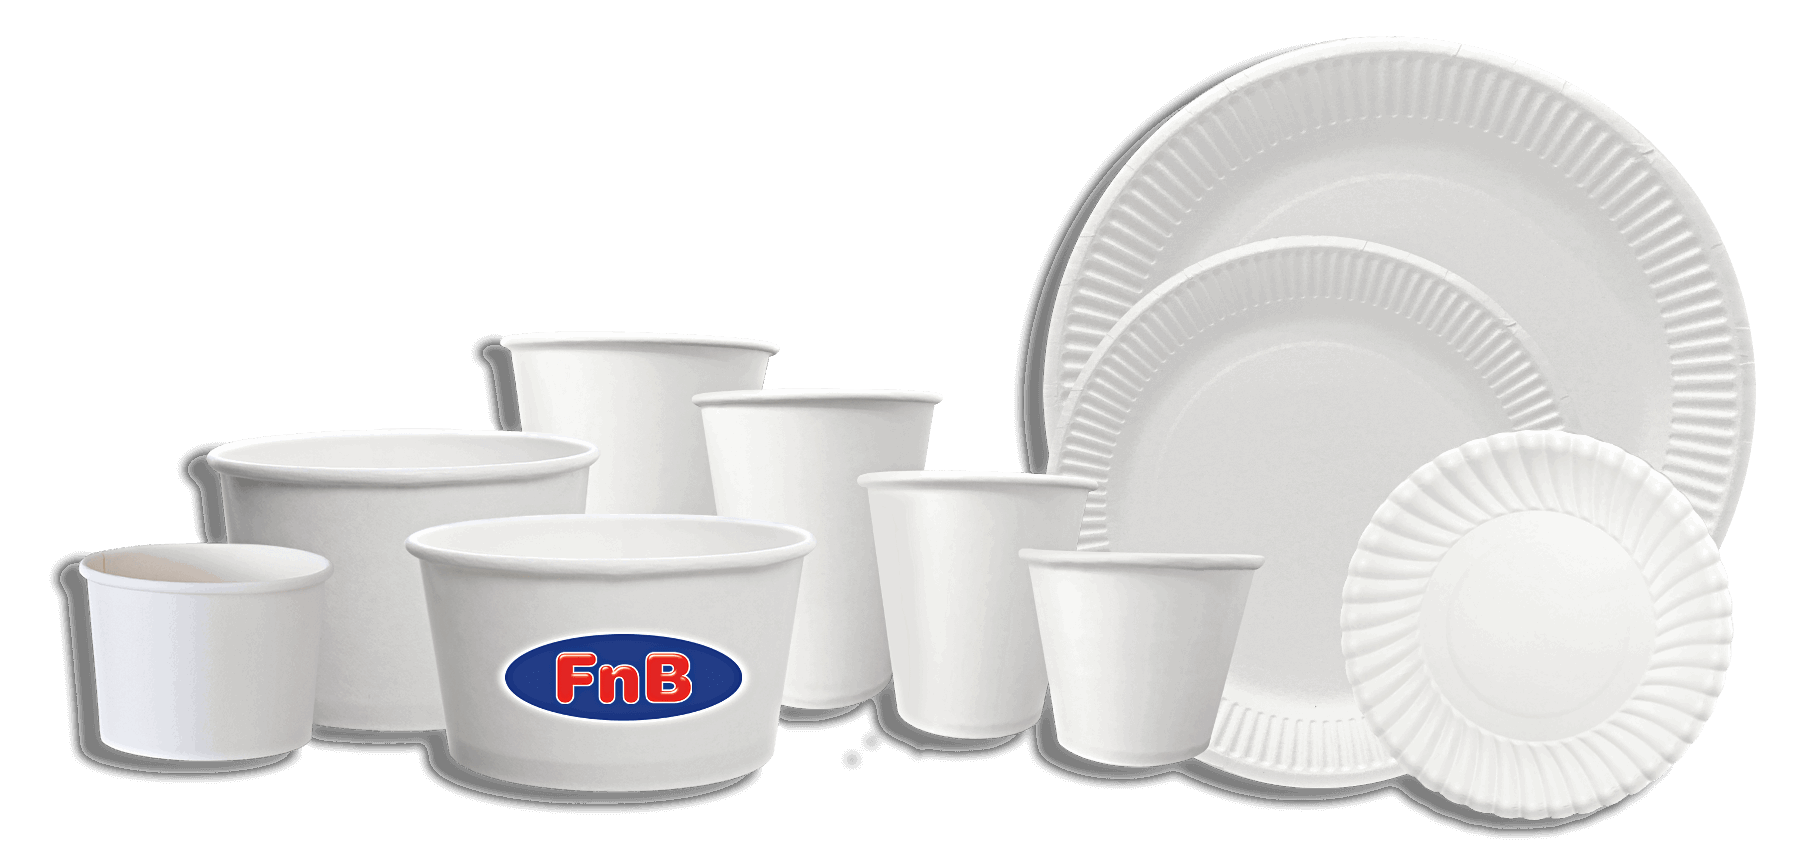 FnB Cups & Plates